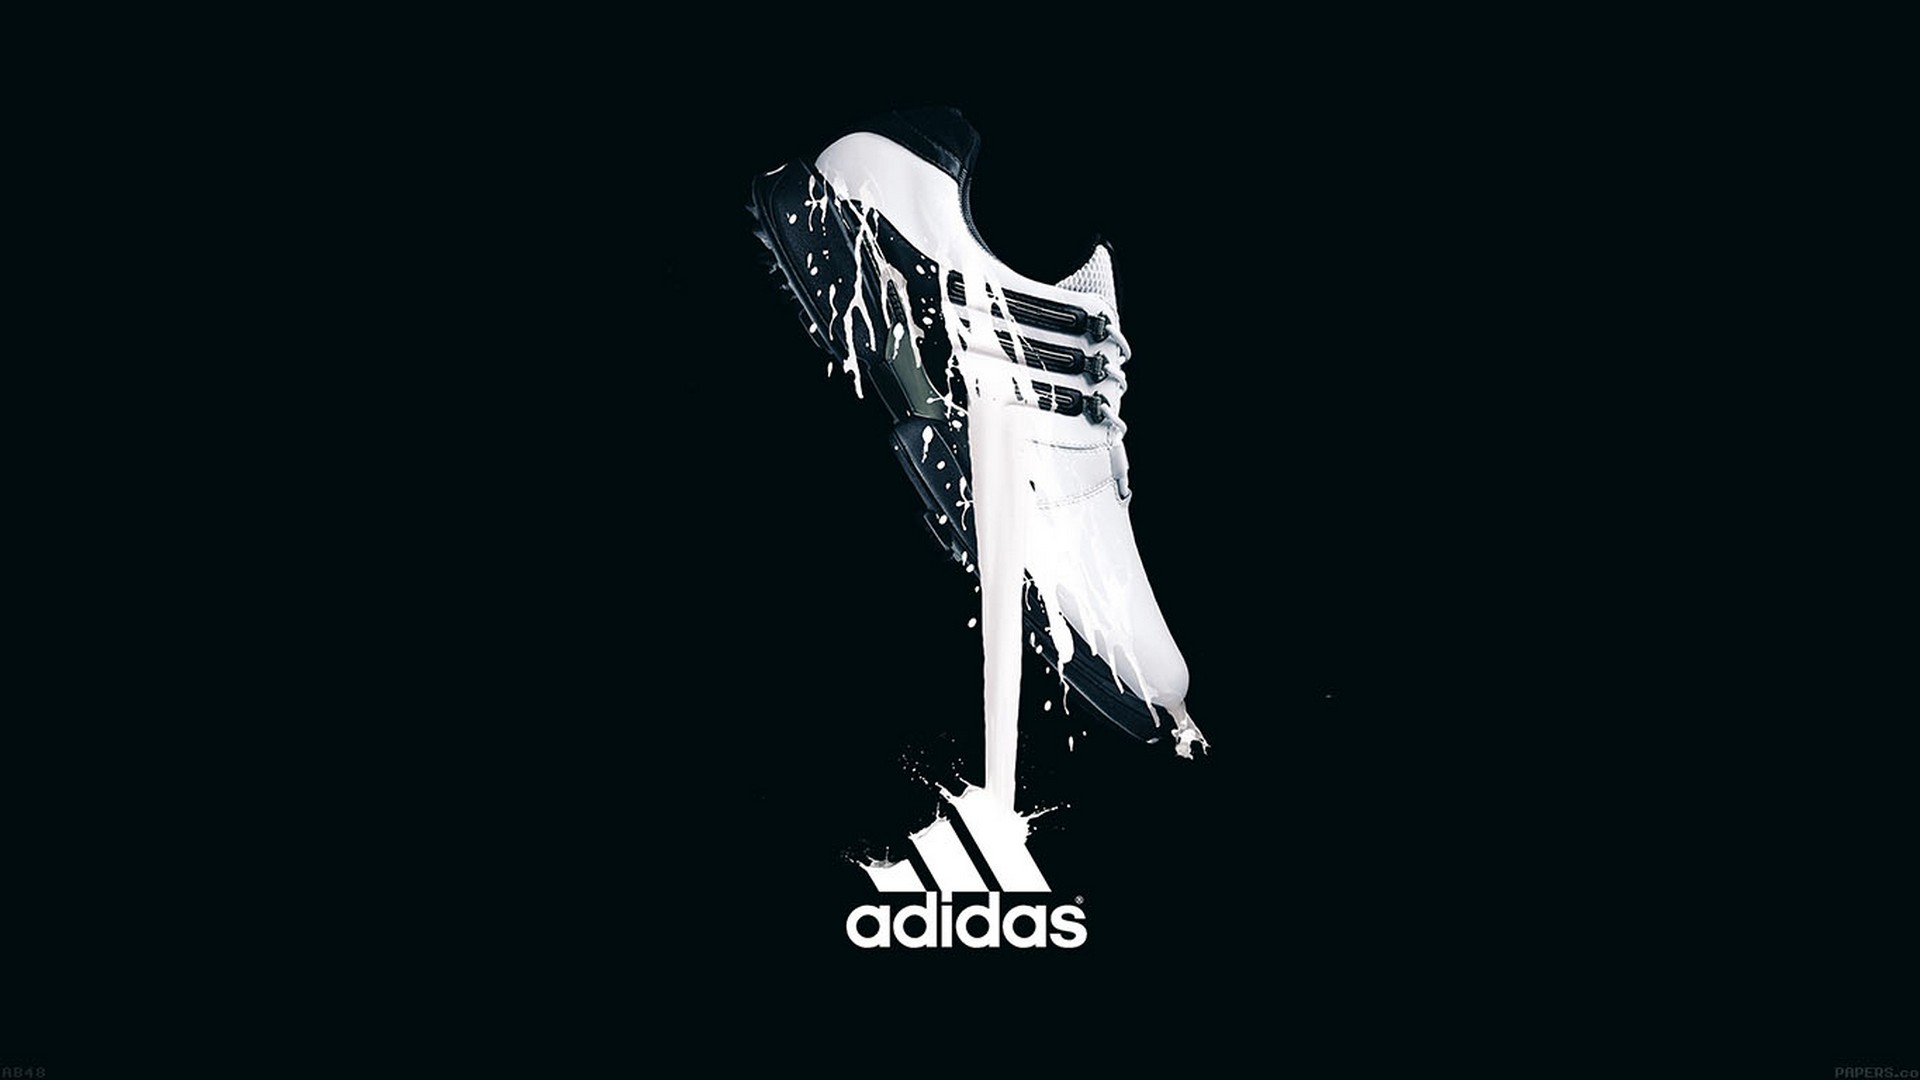 Wallpaper HD Logo Adidas with high-resolution 1920x1080 pixel. You can use this wallpaper for your Desktop Computer Backgrounds, Mac Wallpapers, Android Lock screen or iPhone Screensavers and another smartphone device